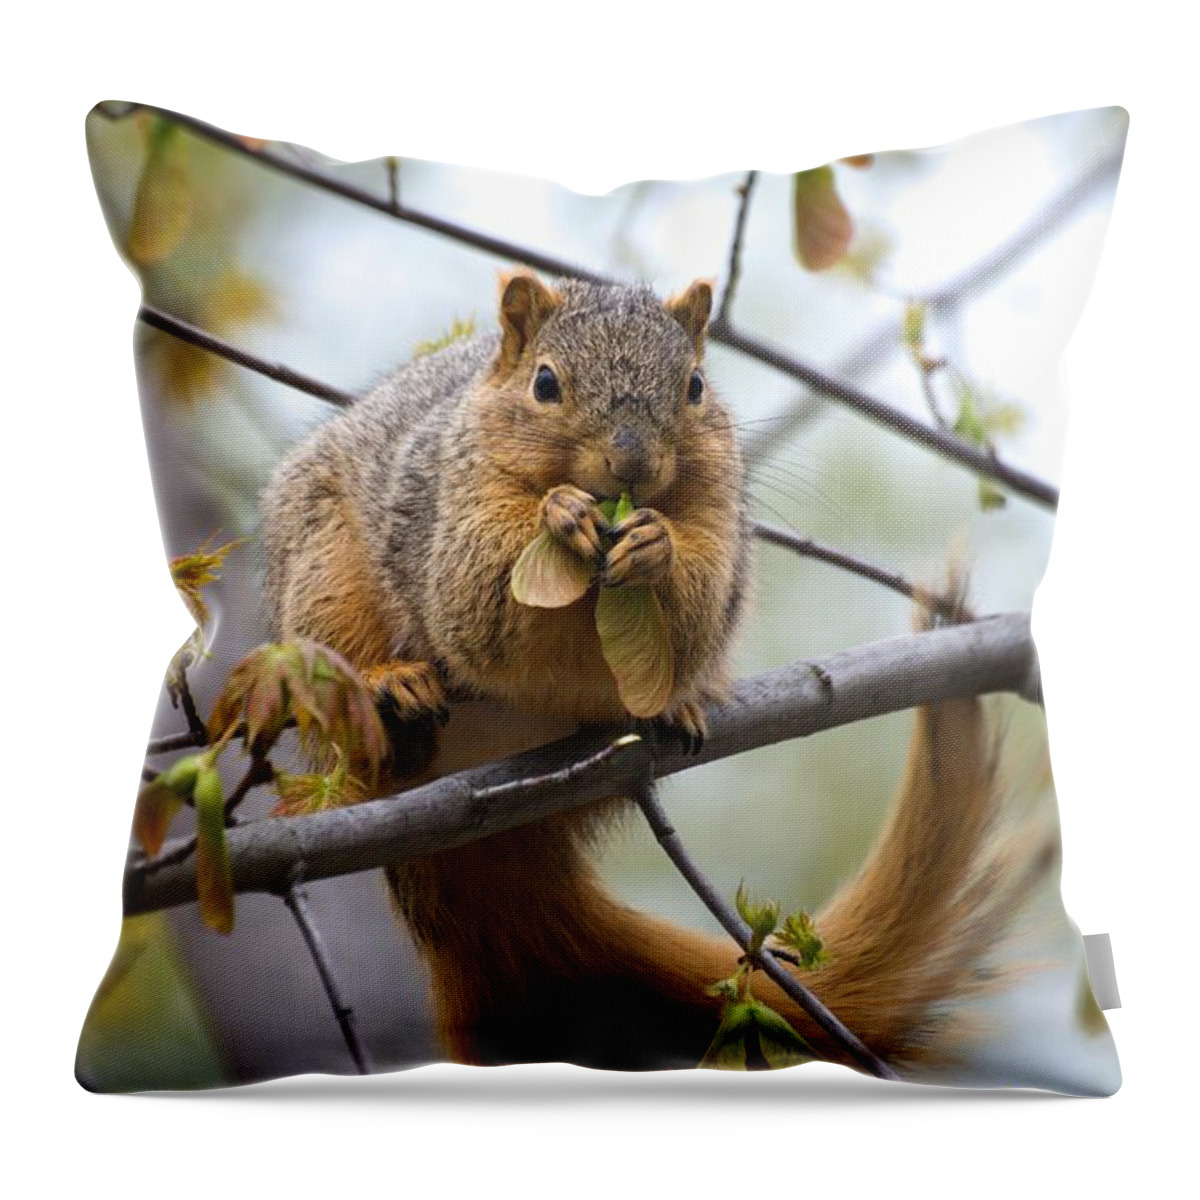 Fox Squirrel Throw Pillow featuring the photograph Fox Squirrel Eating Helicopters by Don Northup